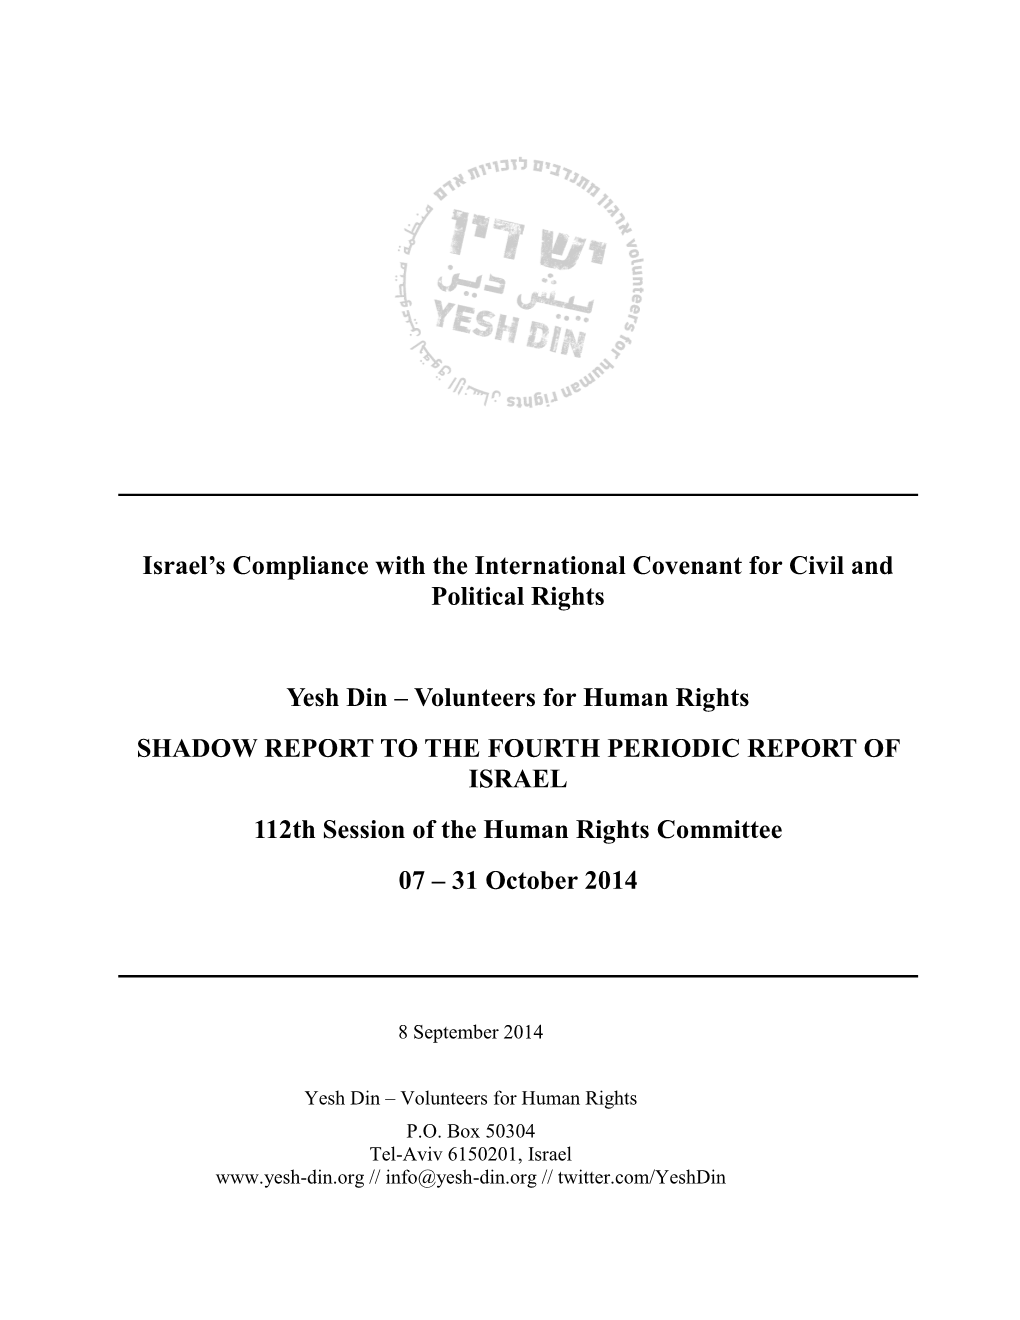 Israel's Compliance with the International Covenant for Civil And